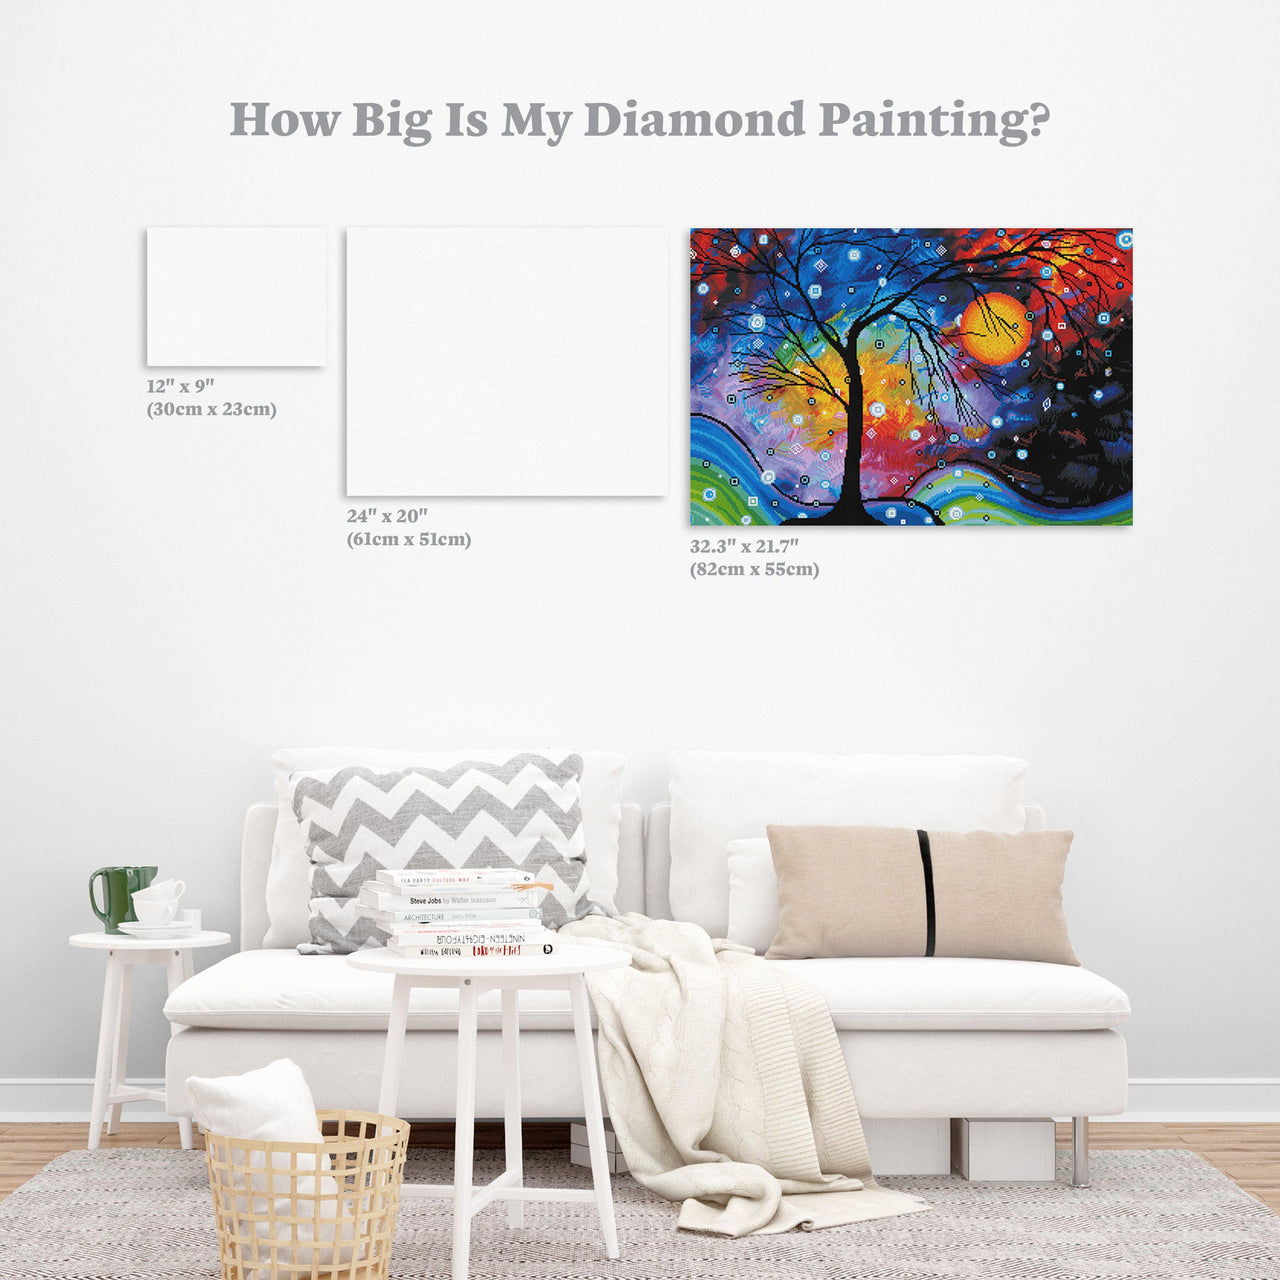 Diamond Painting Winter Sparkle 21.7" x 32.3″ (55cm x 82cm) / Round With 45 Colors Including 2 ABs